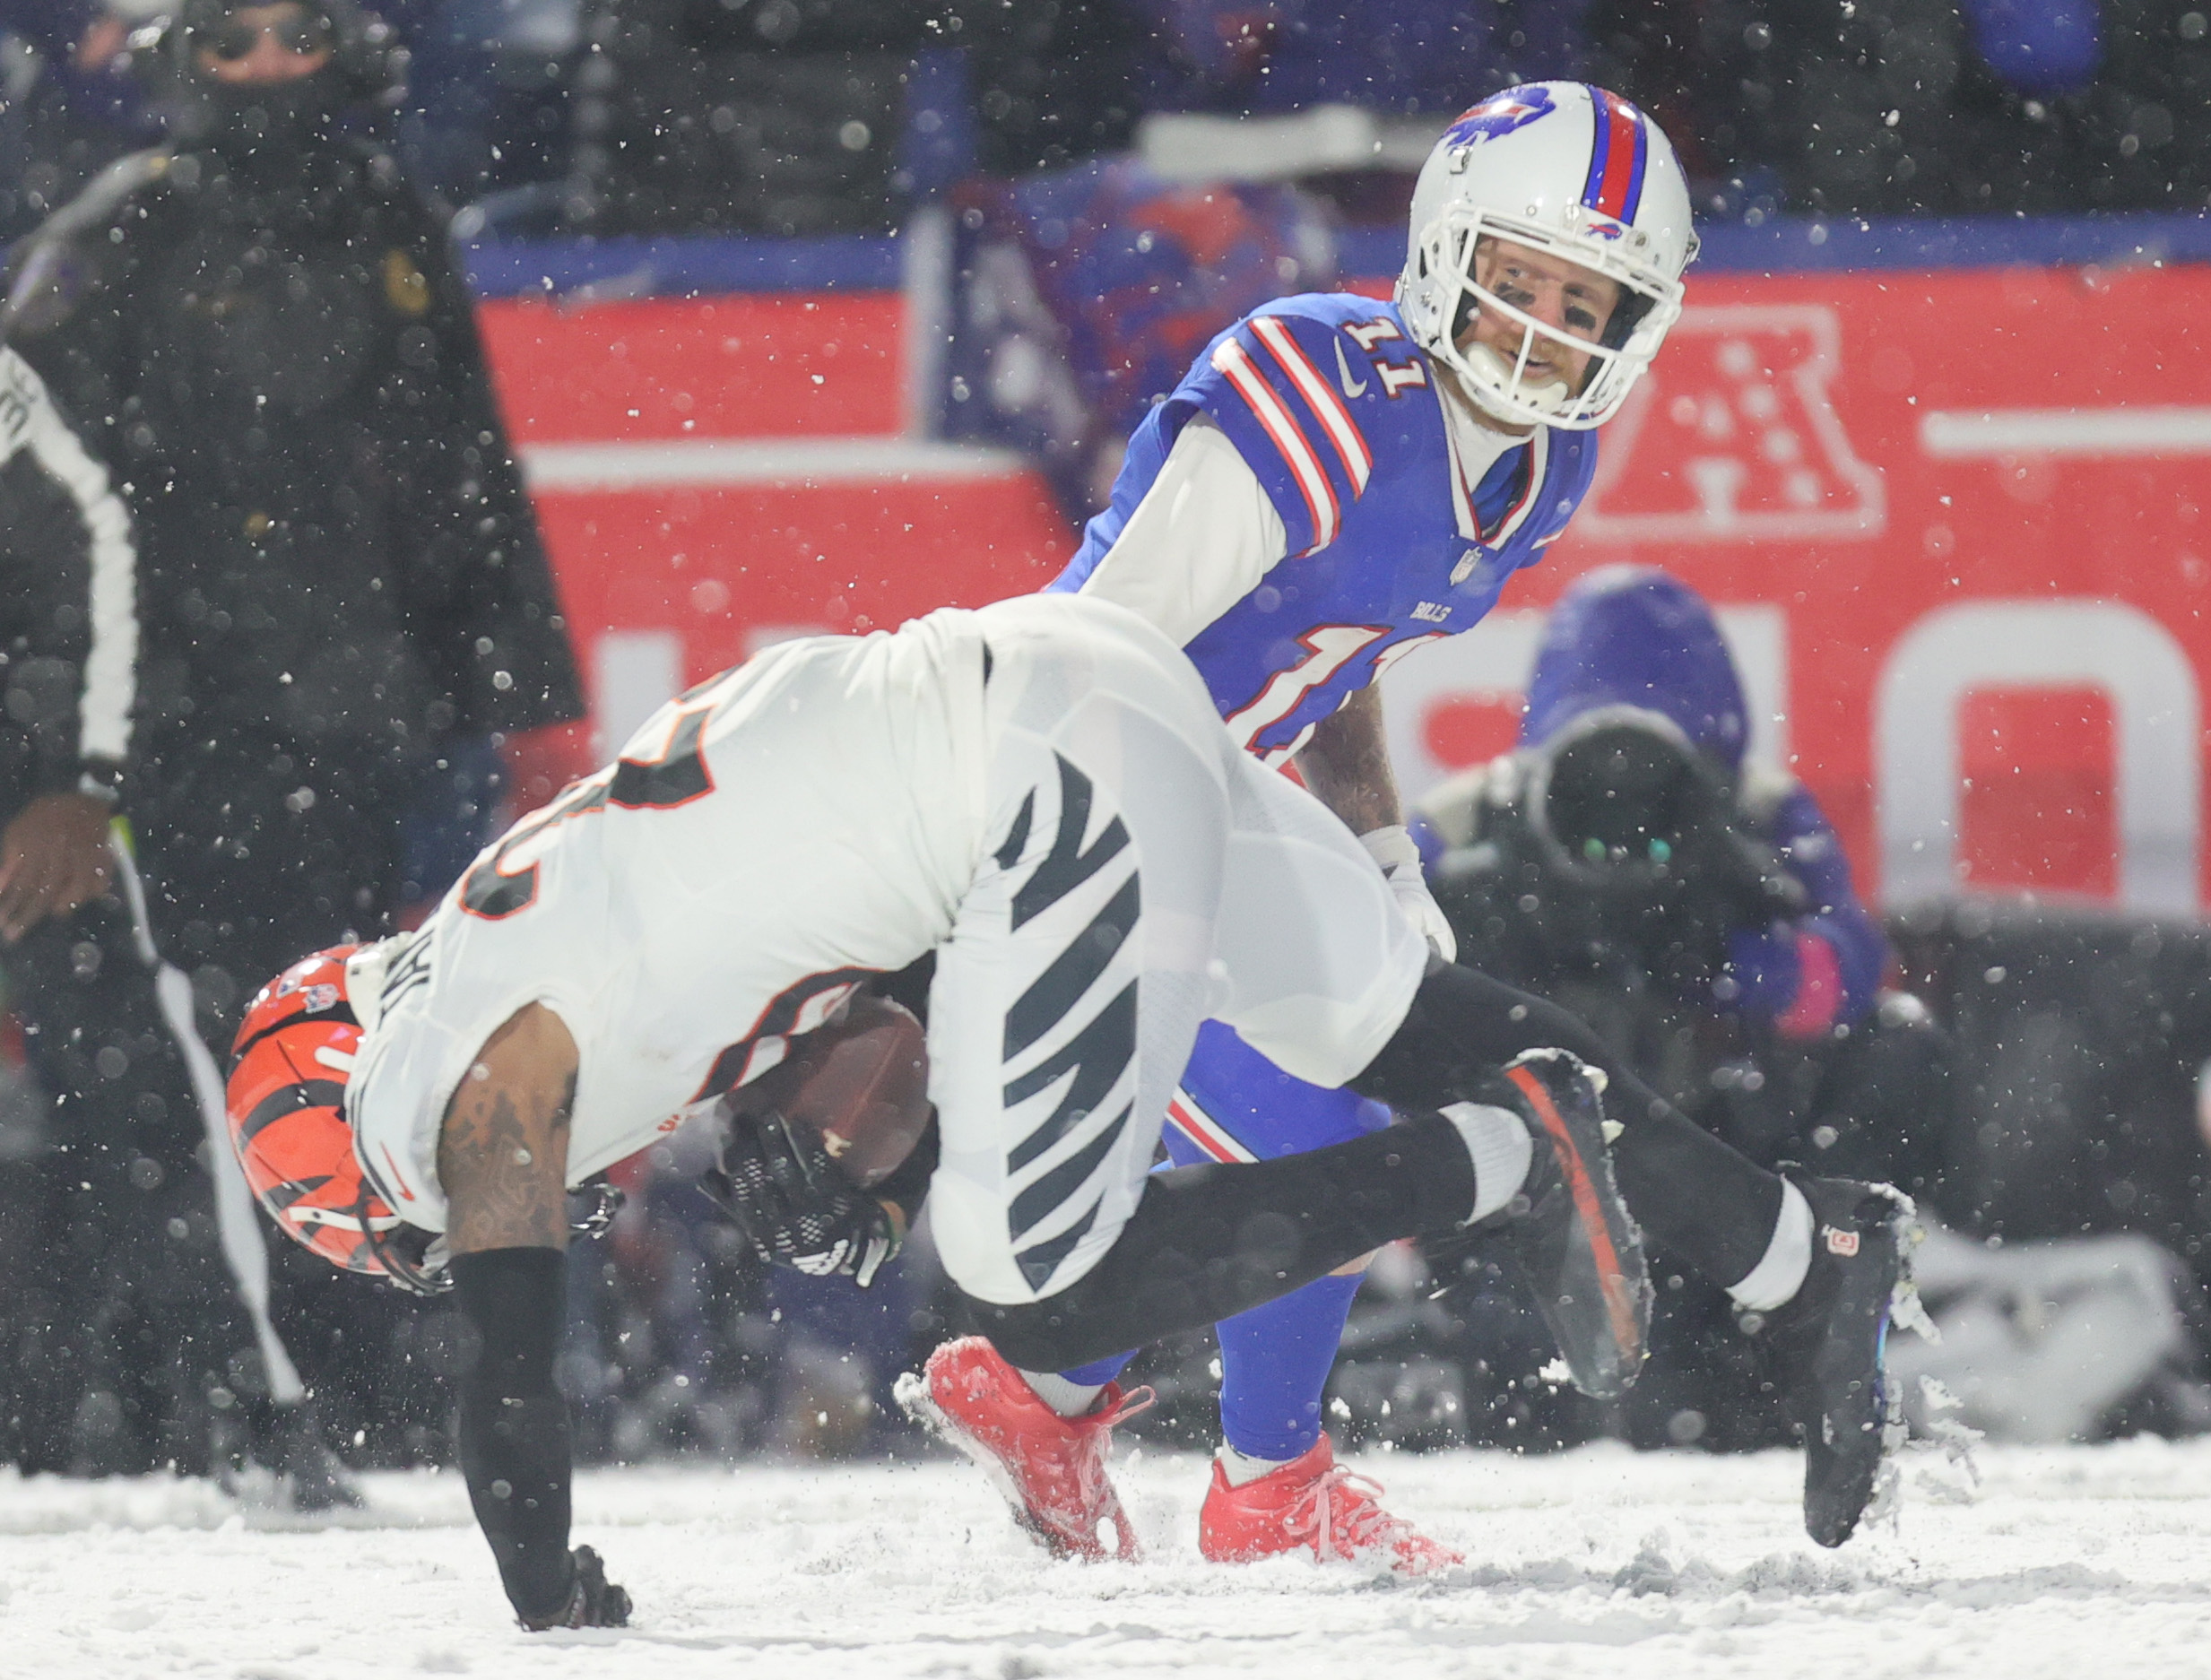 NFL playoffs: Joe Burrow, Bengals plow past Bills in snowy AFC divisional  game